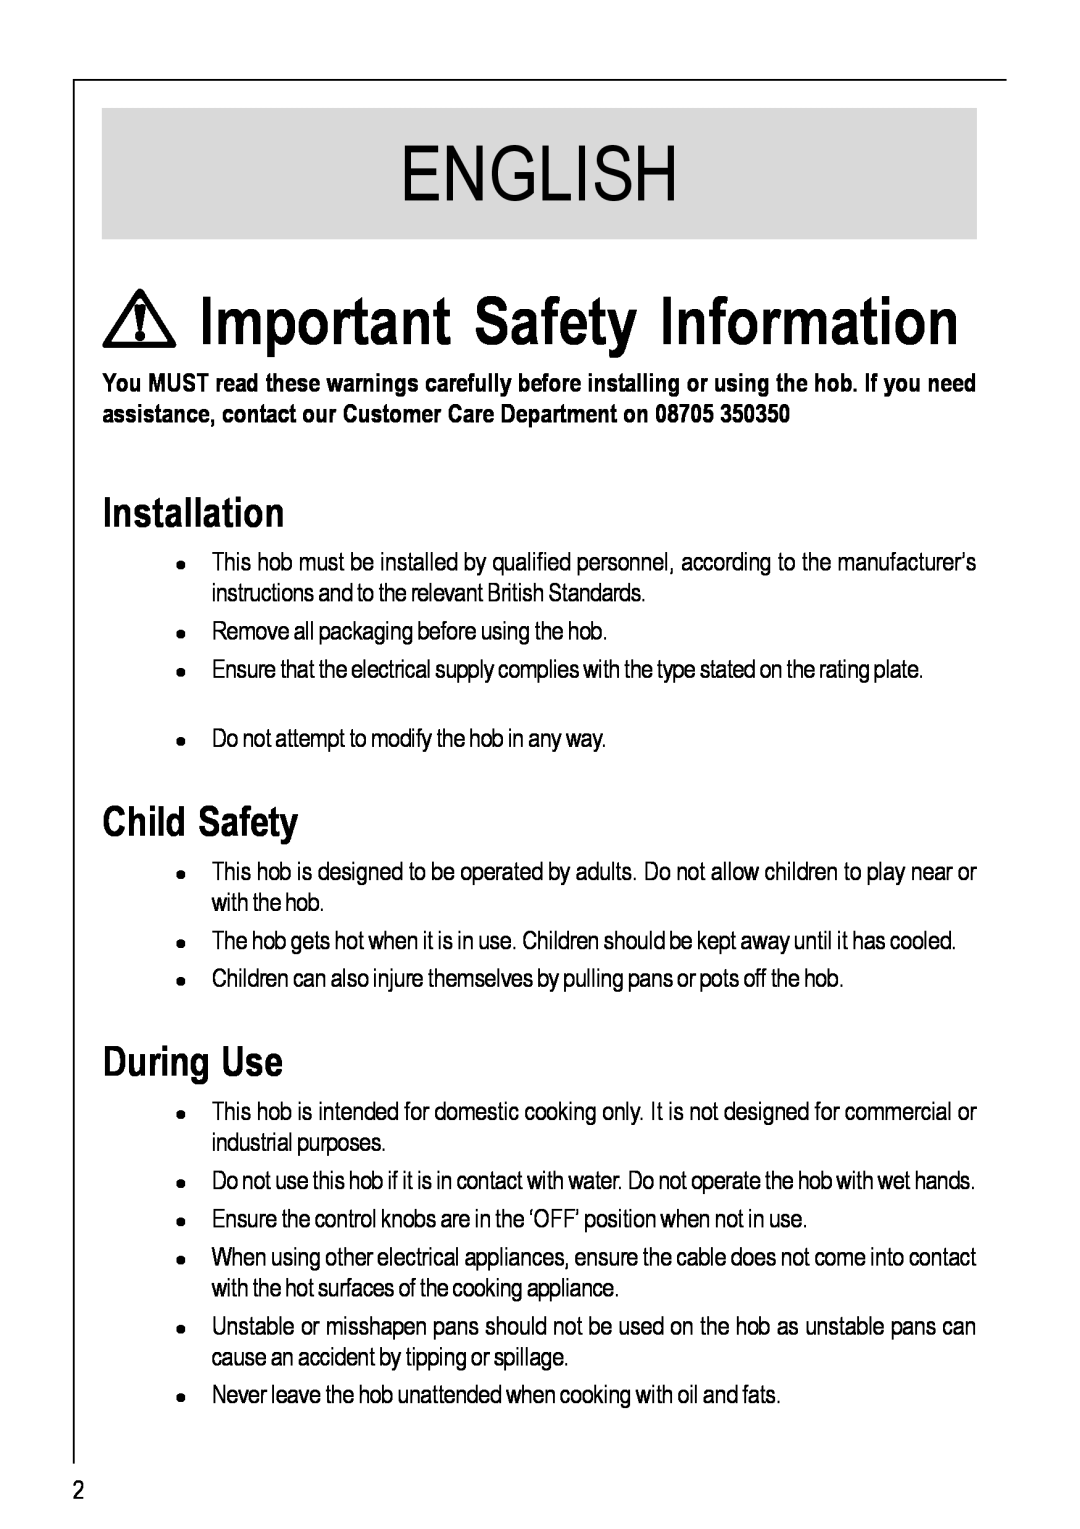 Electrolux 111 K operating instructions English, Important Safety Information, Installation, Child Safety, During Use 